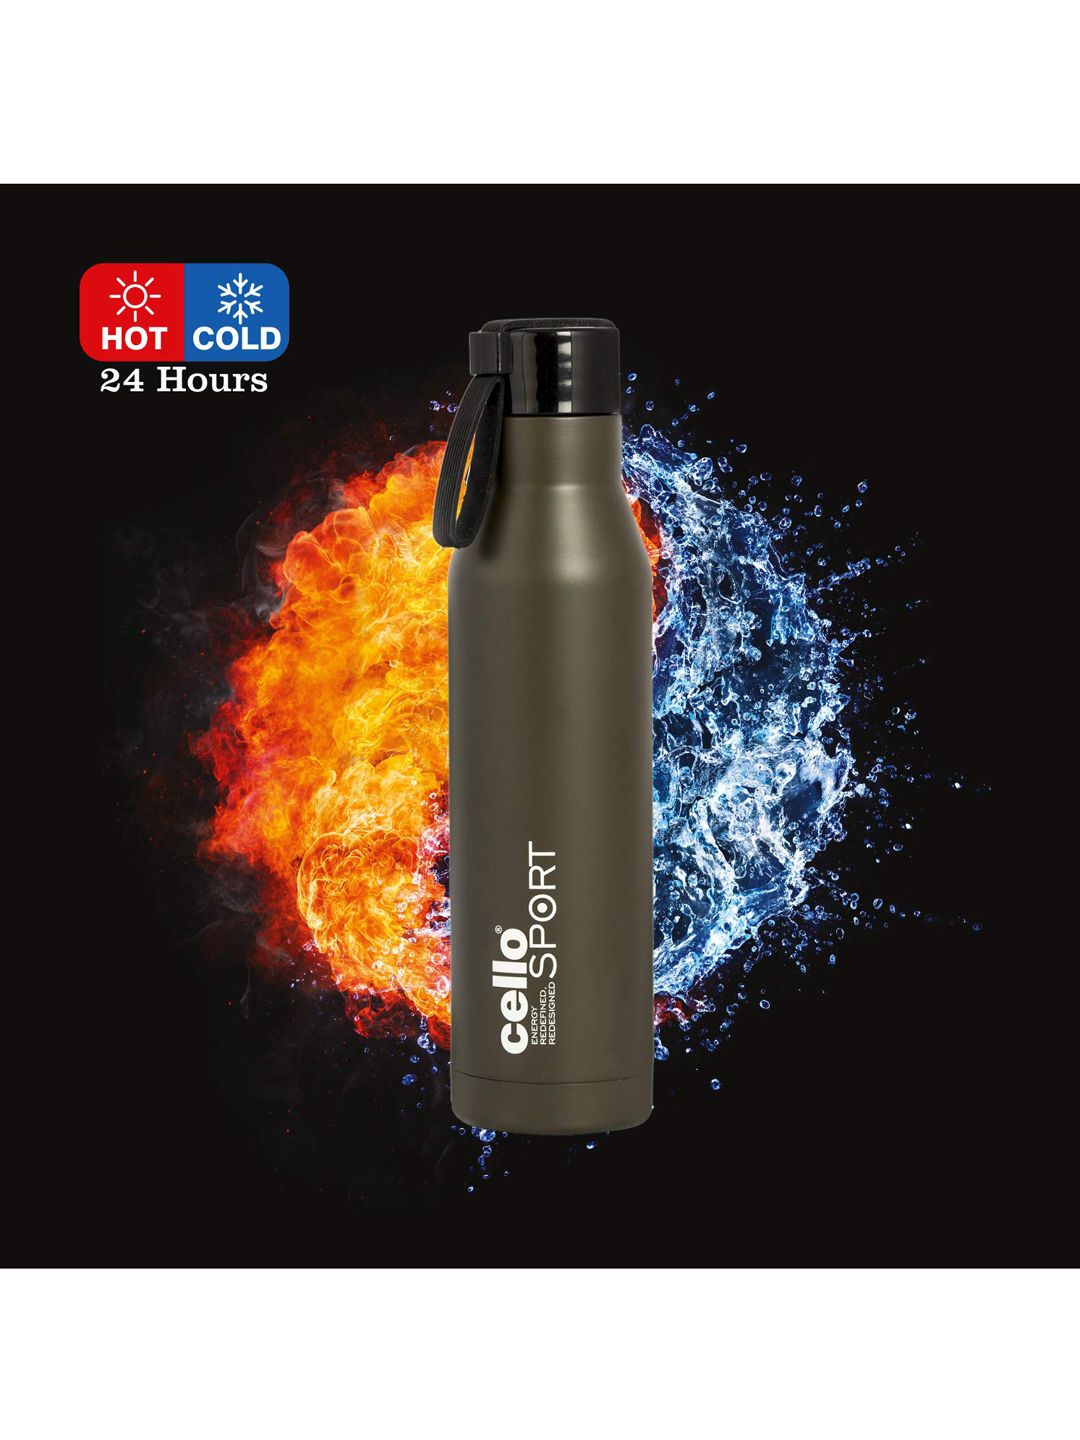 Cello Grey & White Printed Single-Walled Vacuum Insulated Stainless Steel Water Bottle Price in India